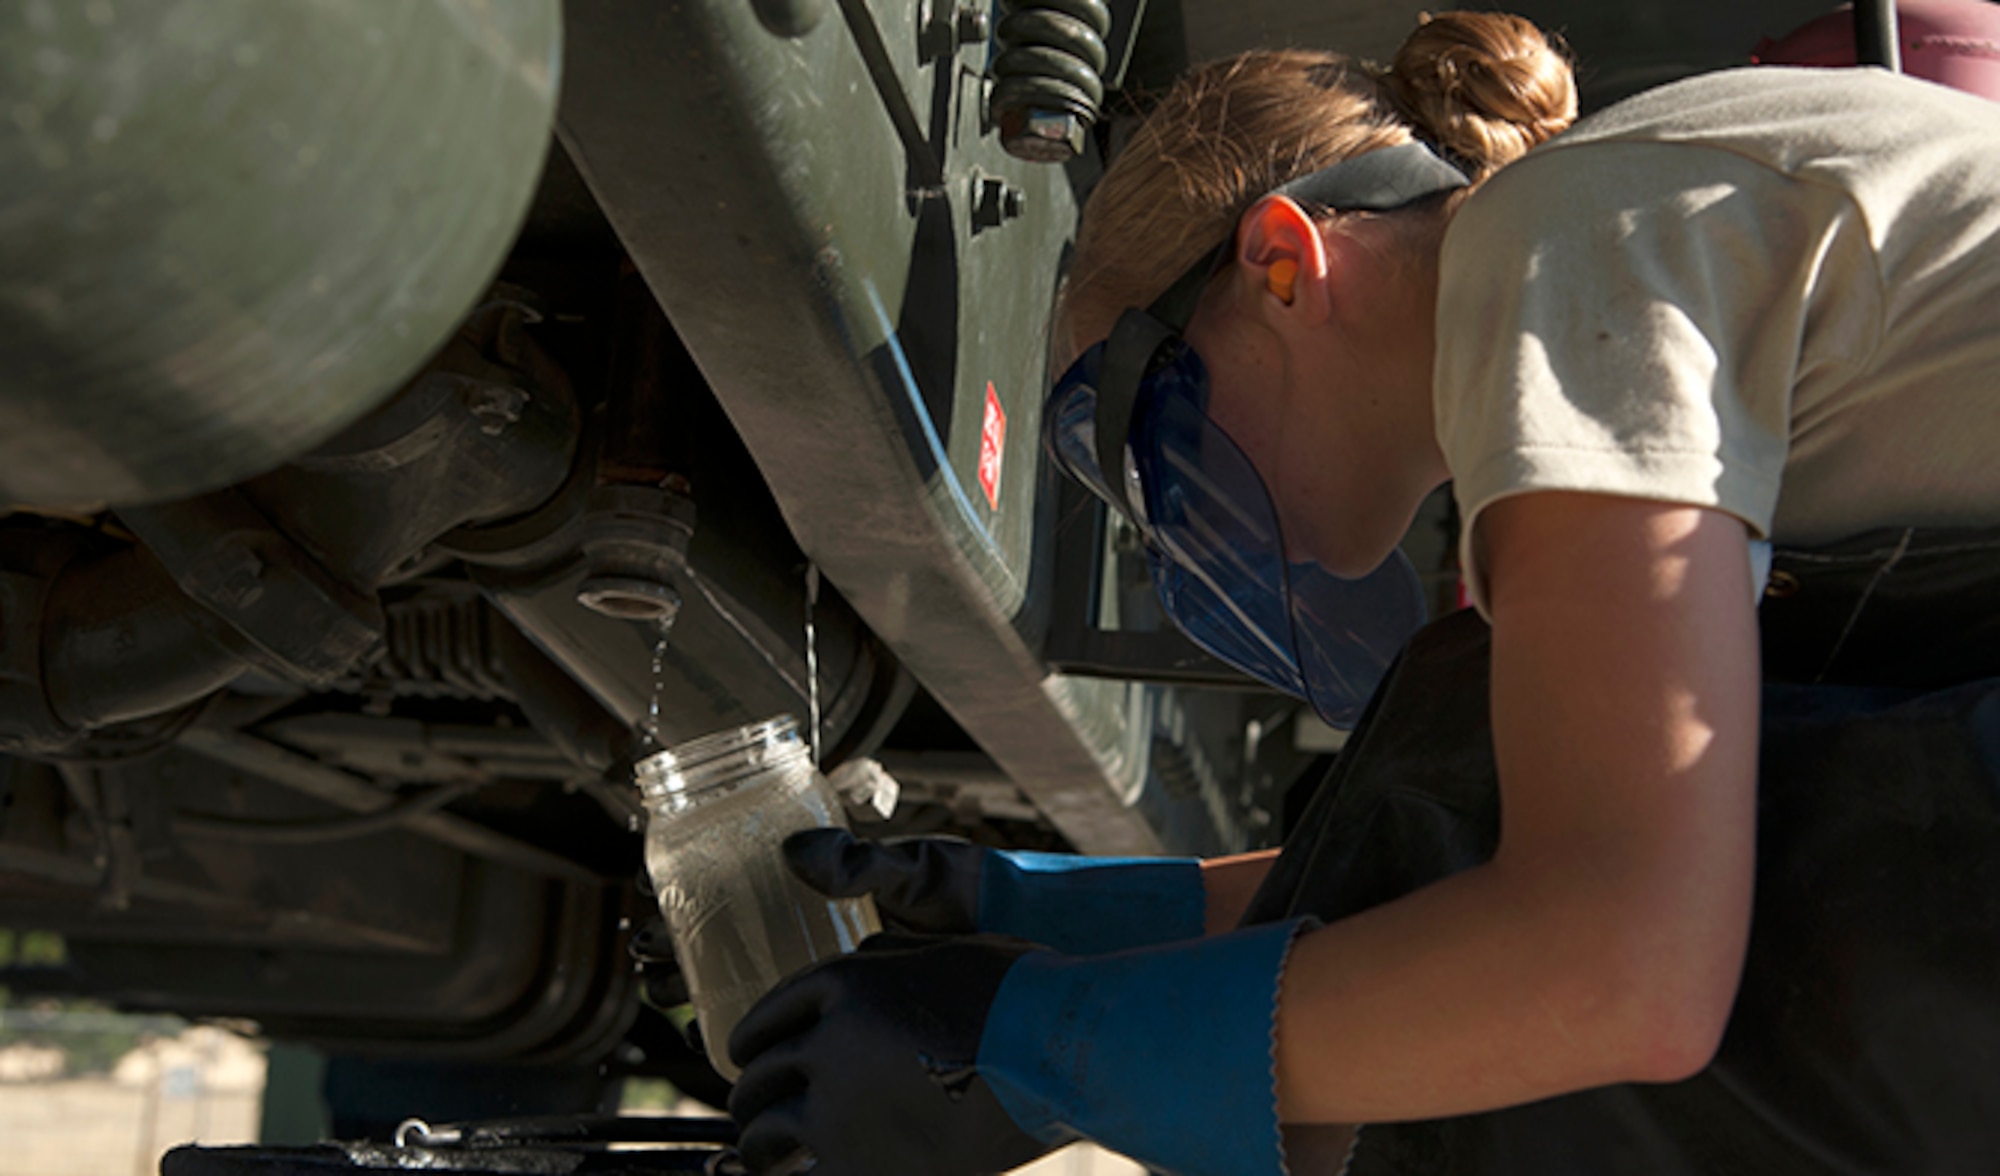 Airman Lorinda Hochstetler, 92nd Logistics Readiness Squadron refueling equipment operator, checks the quality of the fuel inside the R-11 fuel tanker trucks at the fuel equipment staging area July 25, 2016, at Fairchild Air Force Base, Wash. Vital to ensure that no contaminants make it into aircraft, fuels airmen check fuel purity regularly. (U.S. Air Force photo/ Airman 1st Class Ryan Lackey)